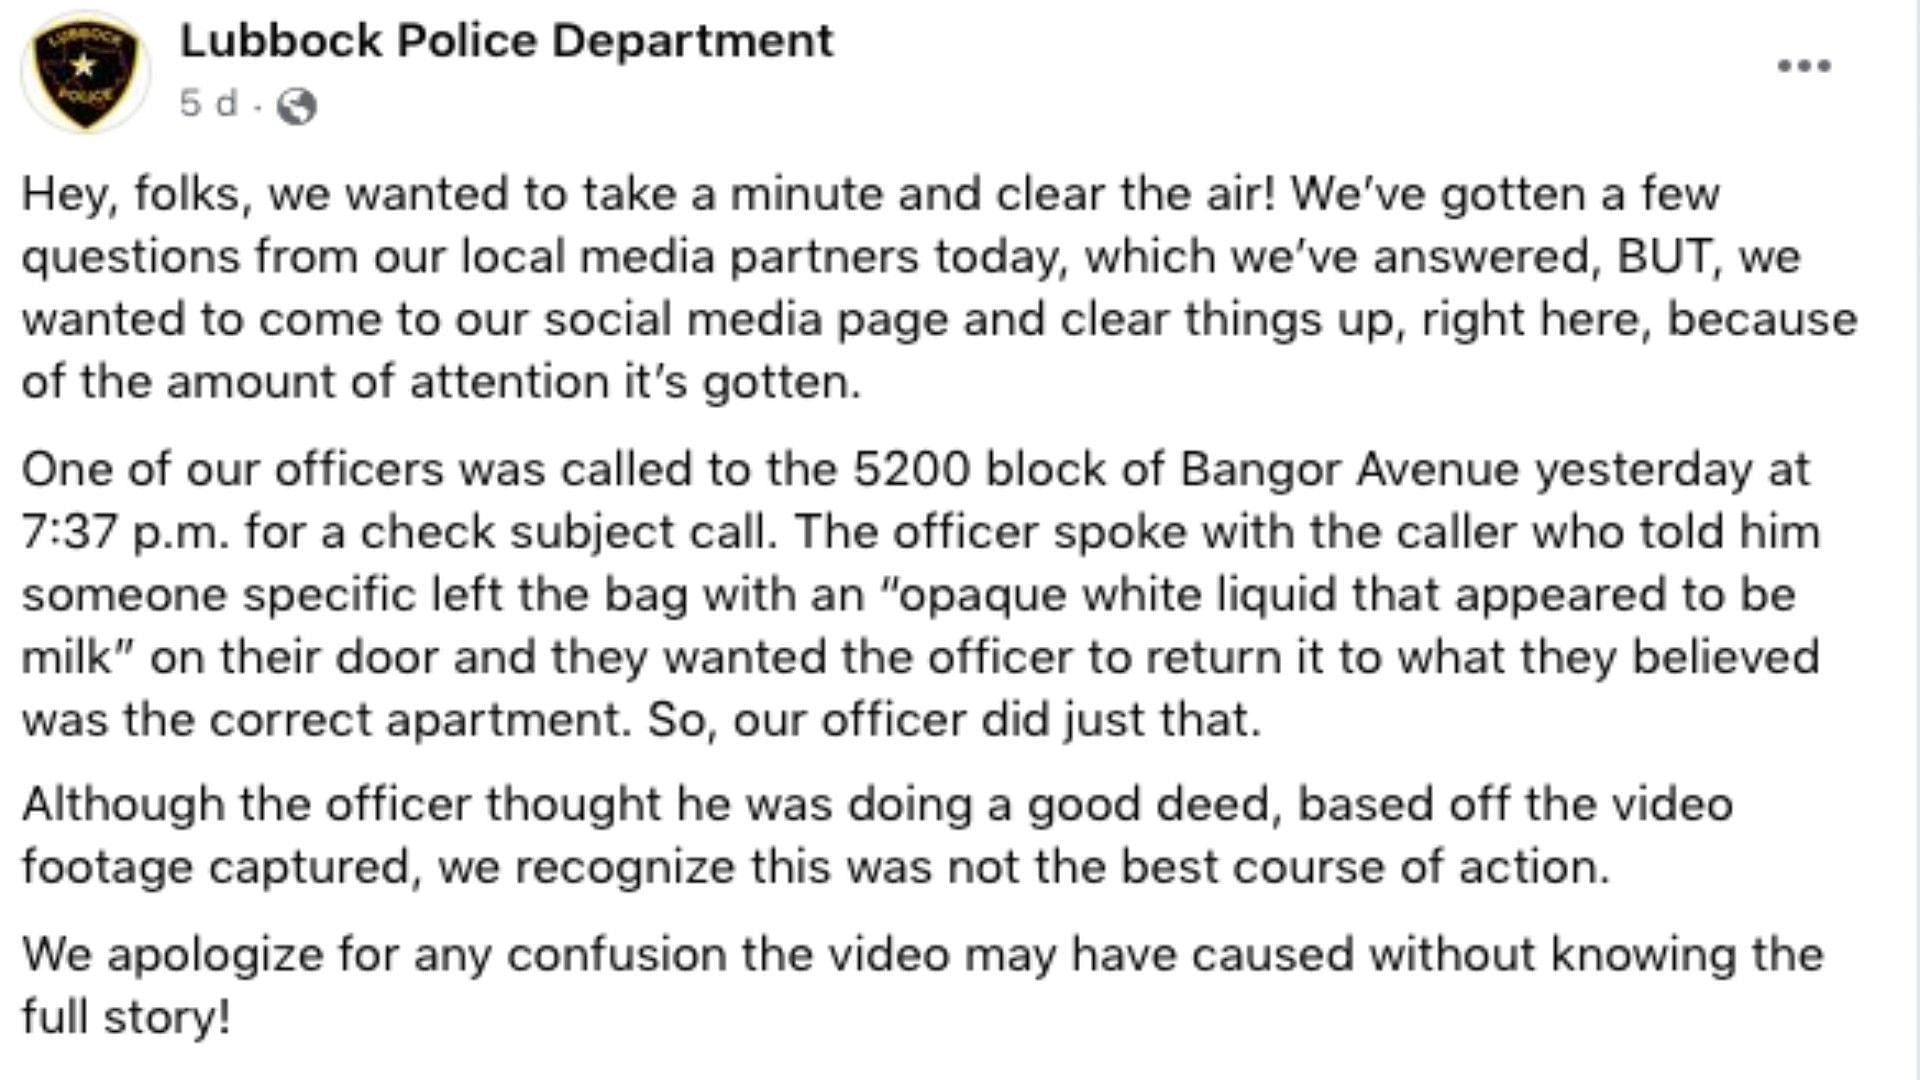 The Lubbock Police Department&#039;s apology (image via Lubbock Police Department/Facebook)